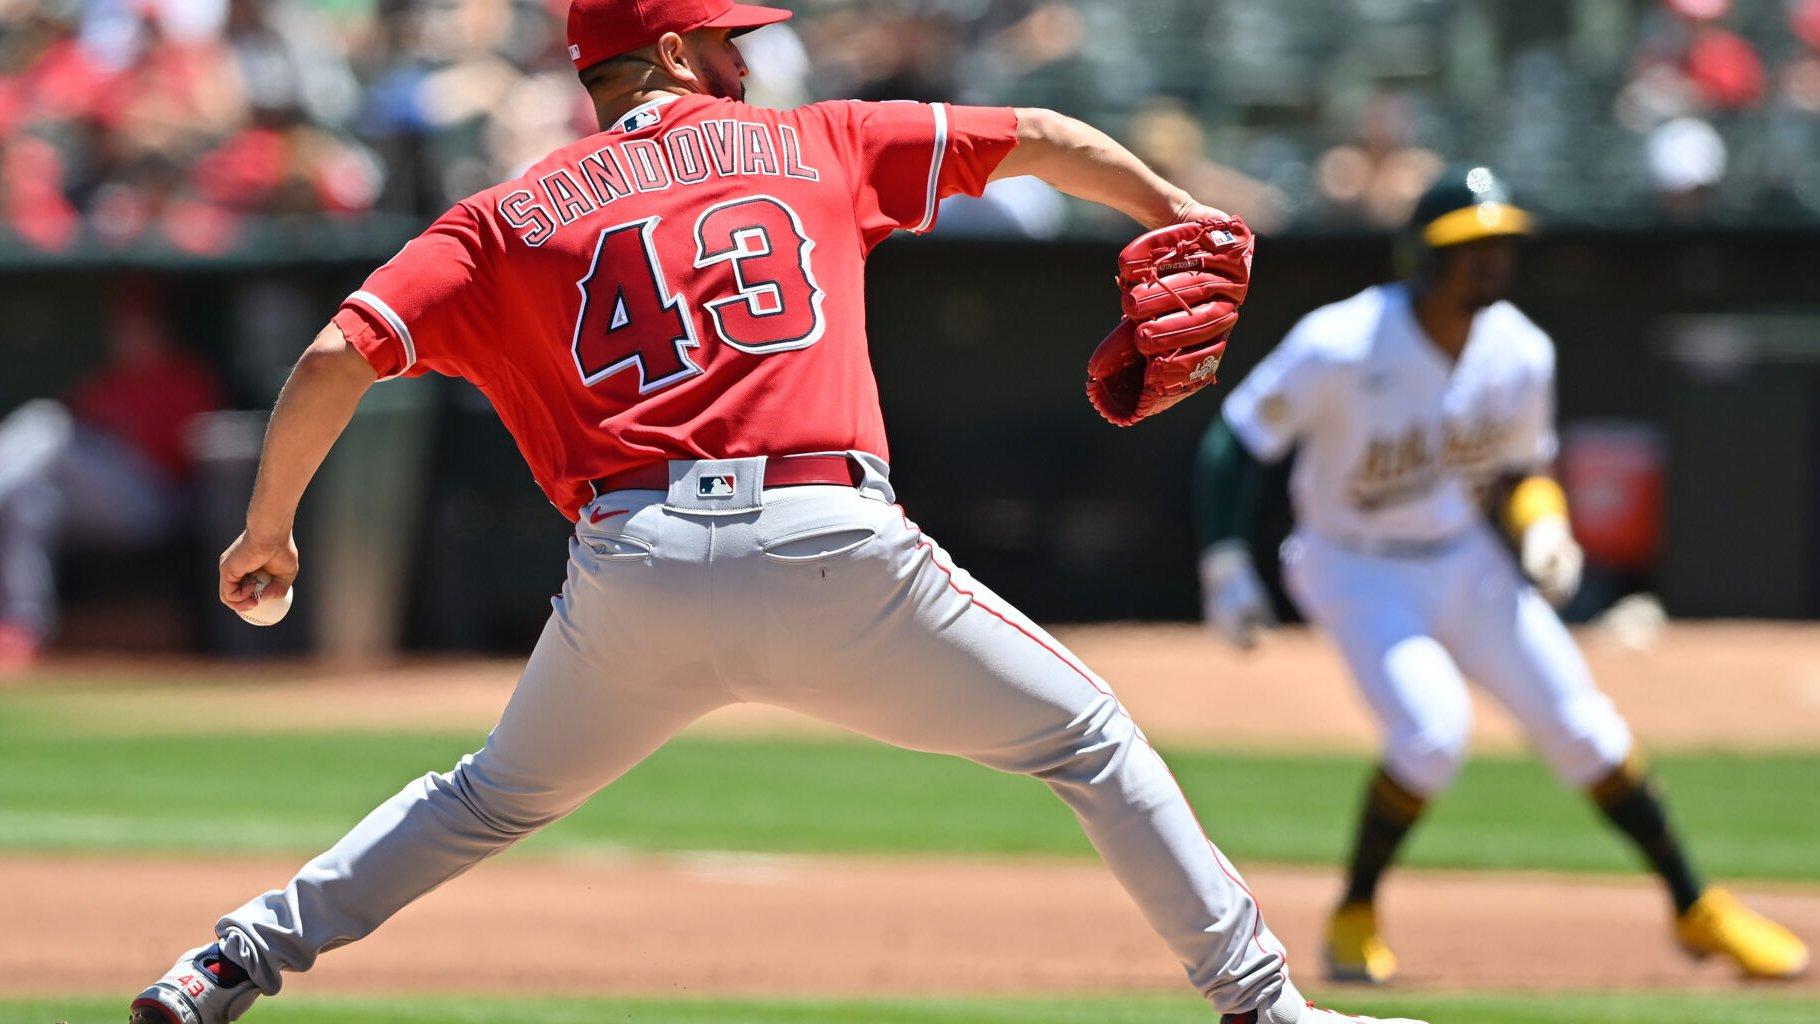 A’s vs. Angels (May 22): Sandoval to shut down A’s again to seal series win